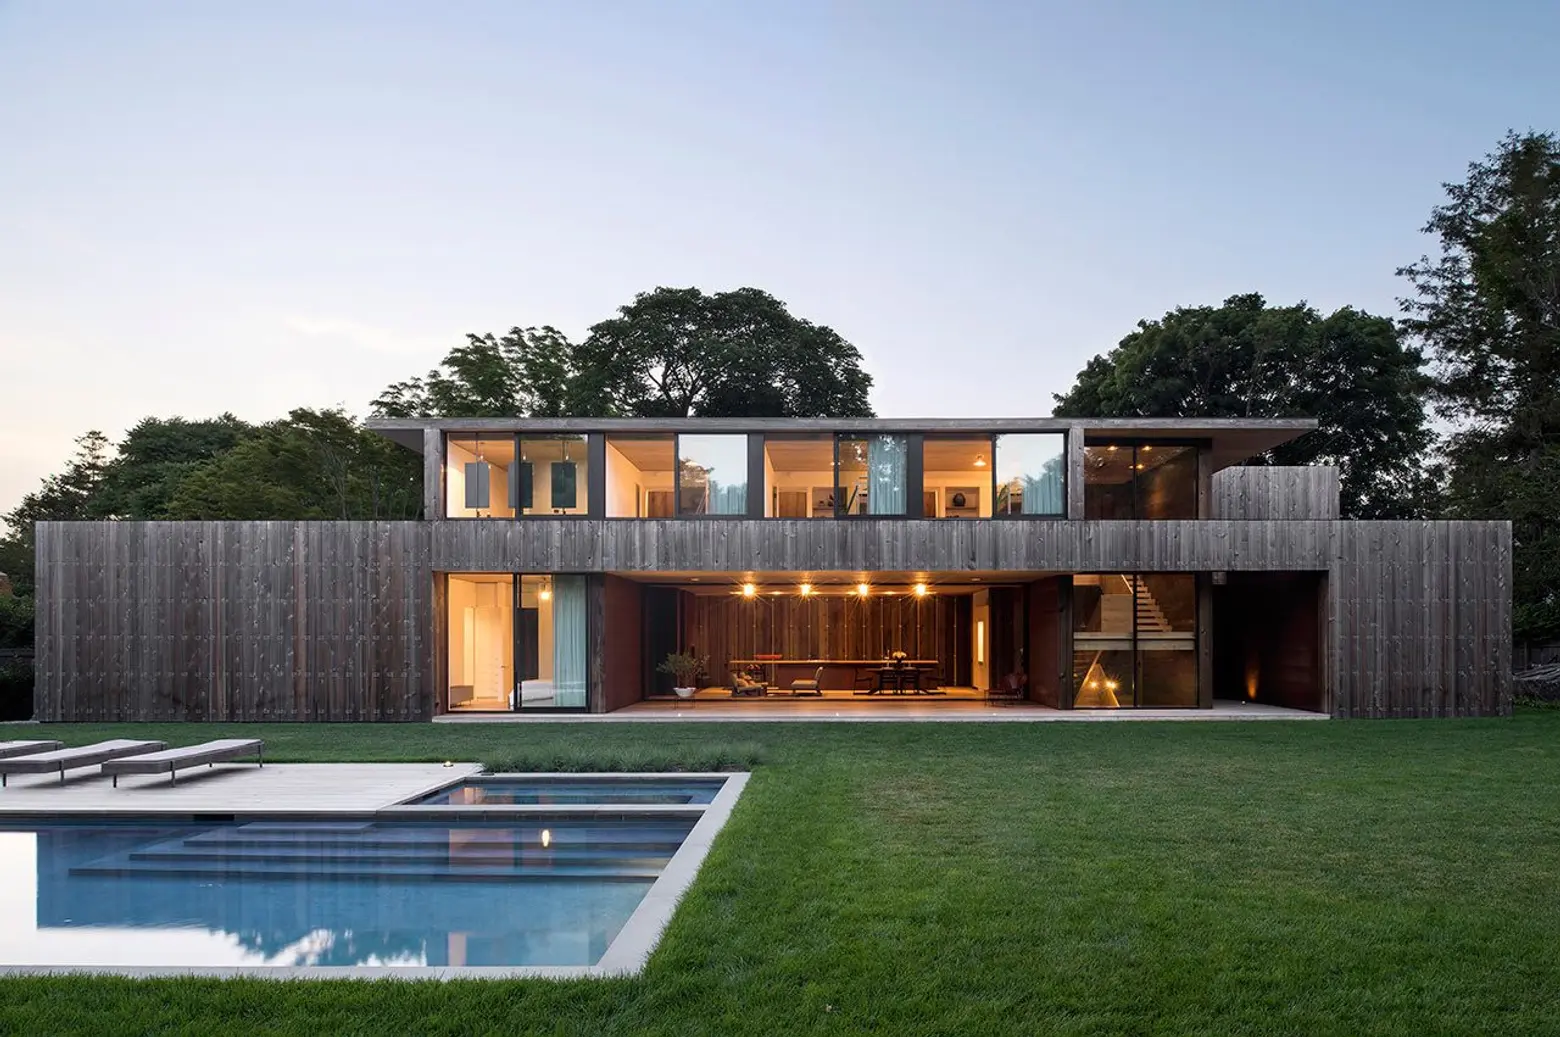 Bates Masi + Architects focused on acoustics for this Hamptons house design